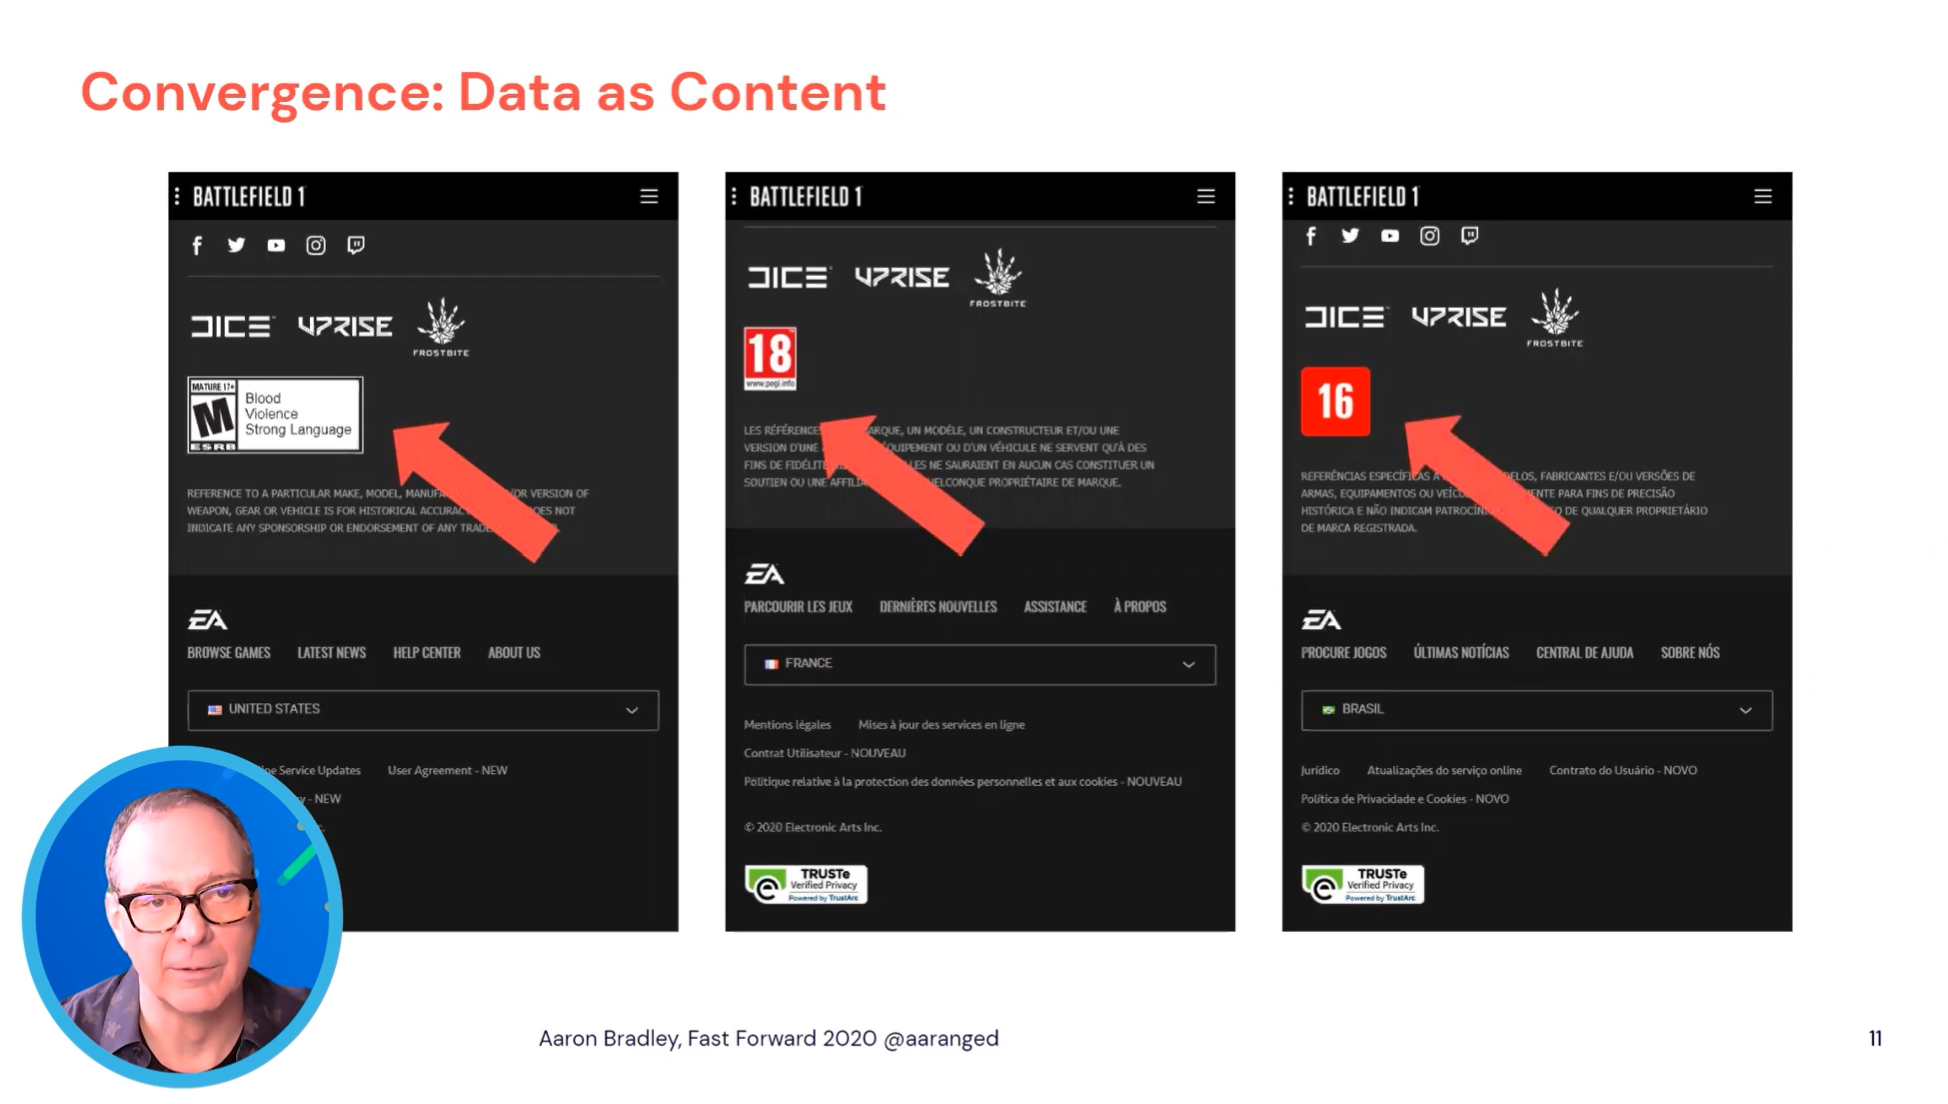 Screenshot of convergence: data as content part of EA's presentation deck